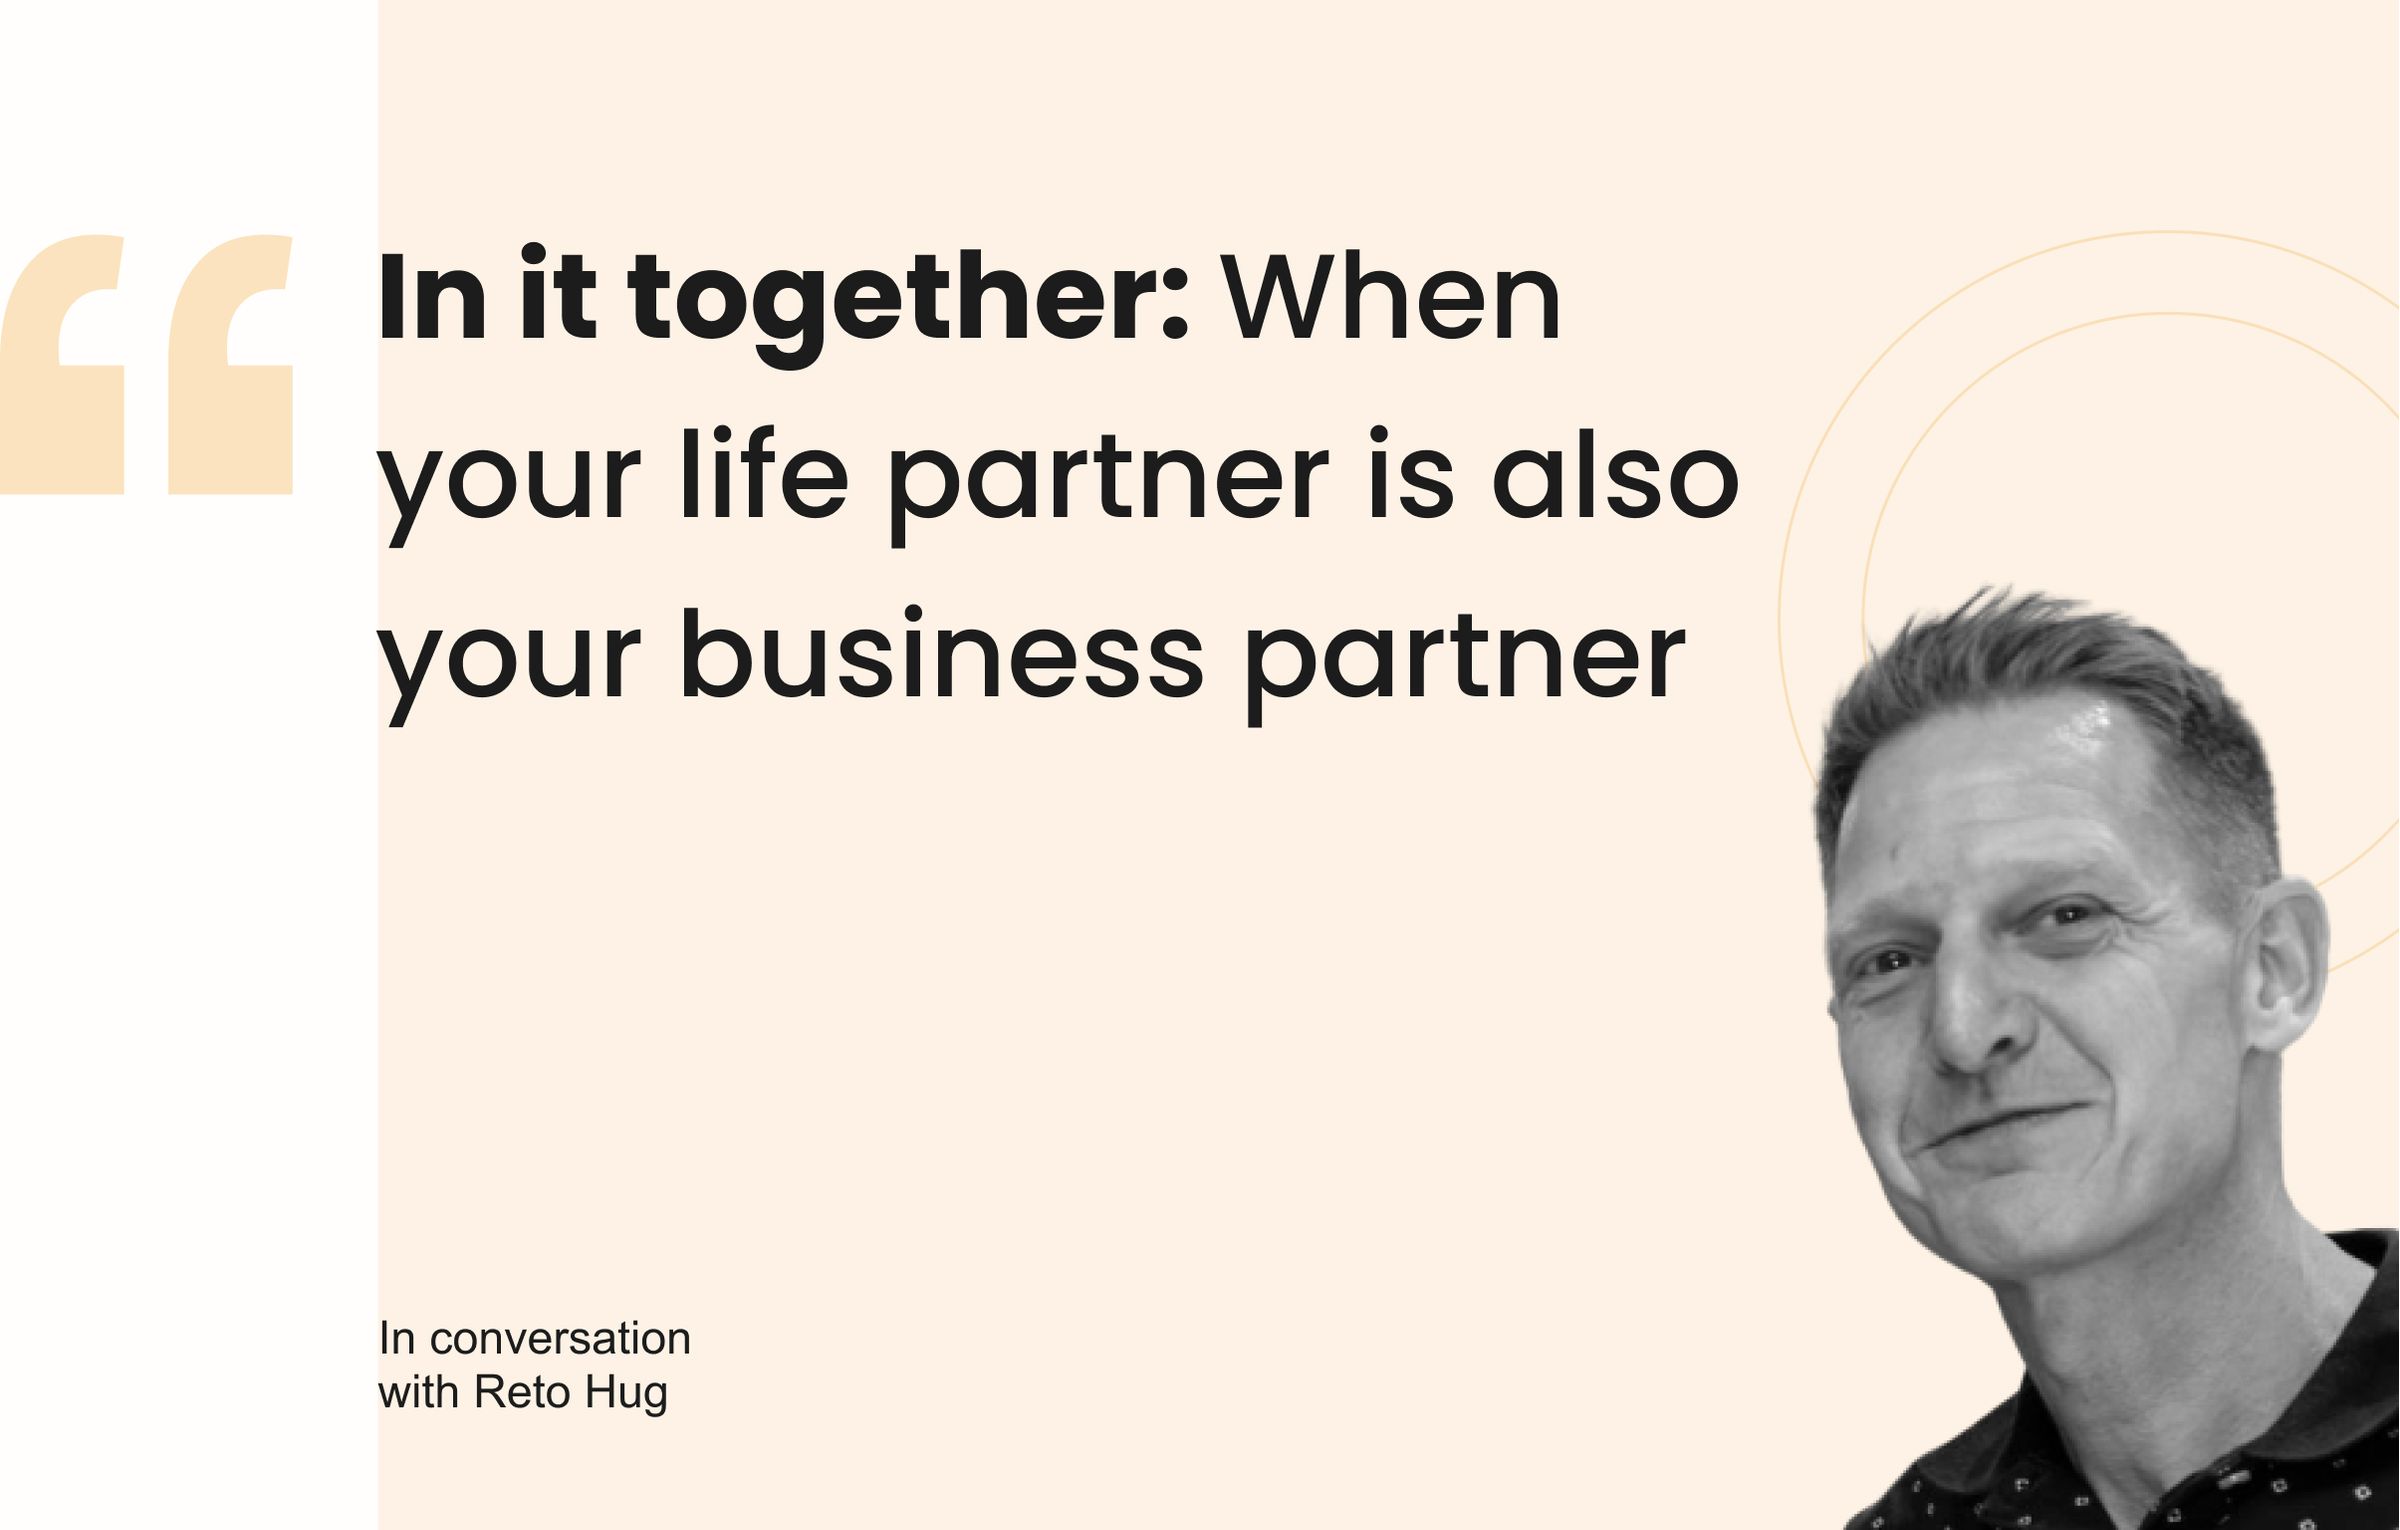 In it together: When your life partner is also your business partner